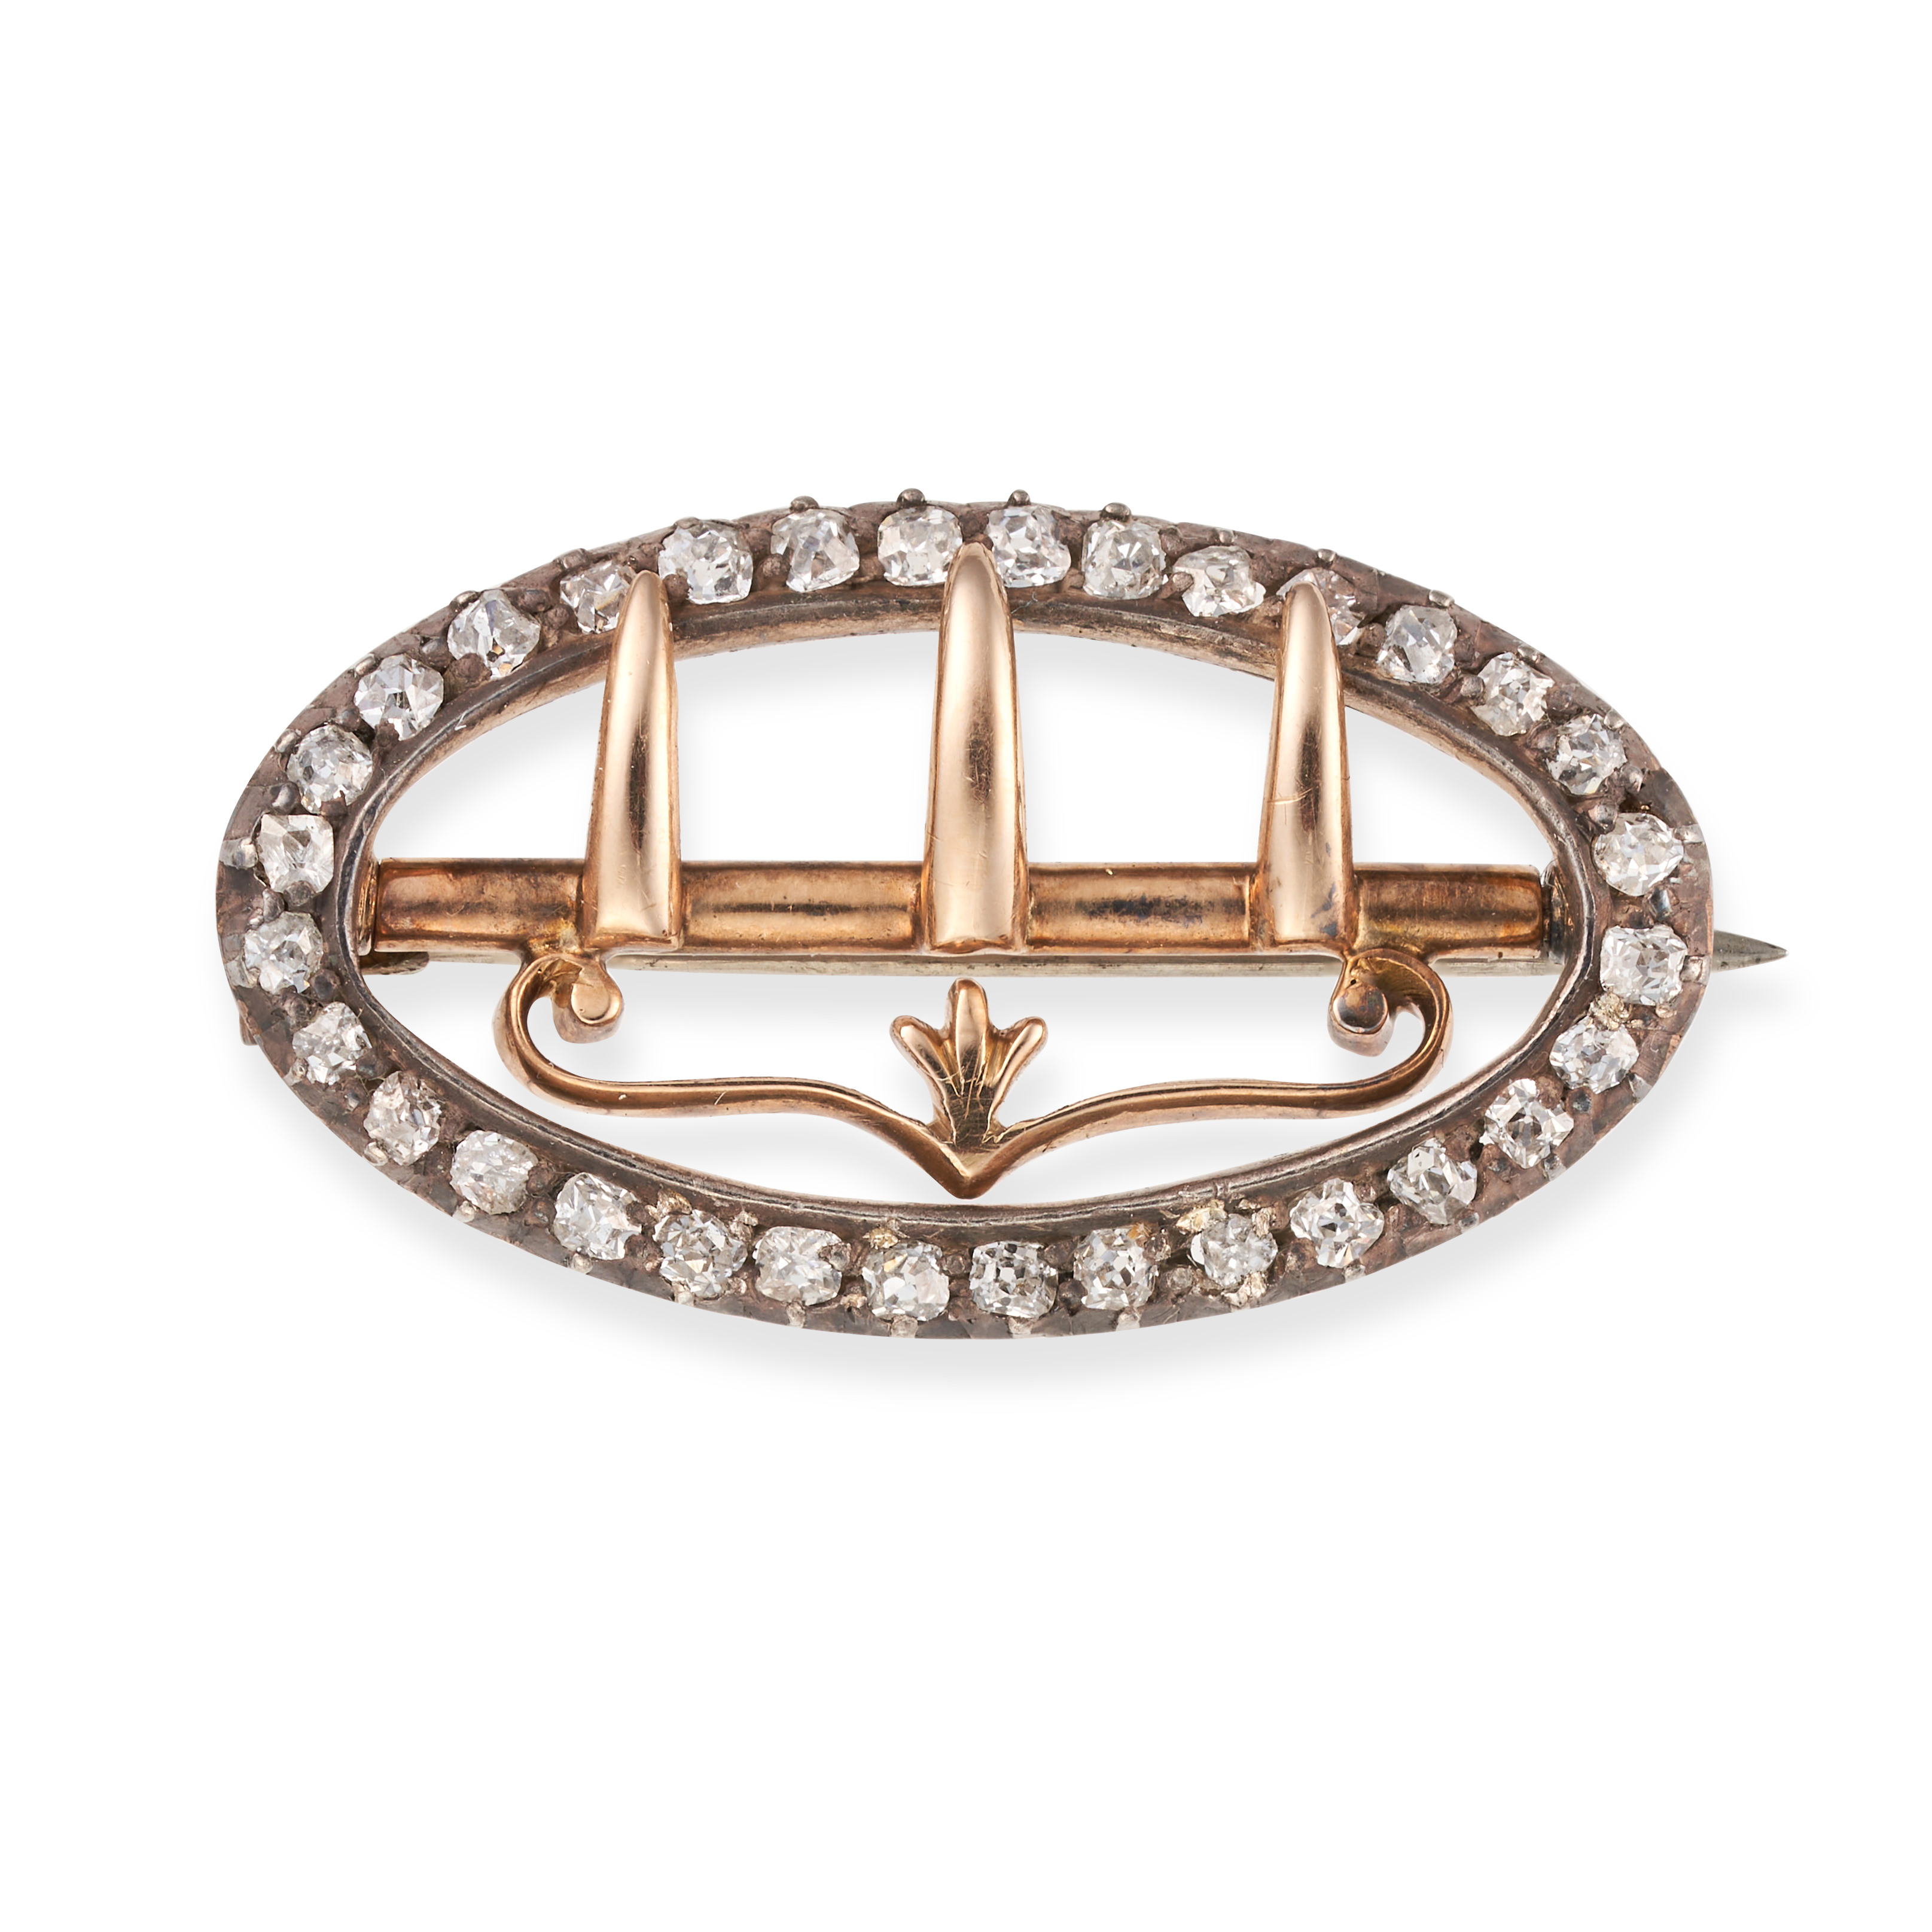 AN ANTIQUE DIAMOND BUCKLE BROOCH in yellow gold and silver, designed as a buckle set with old cut...